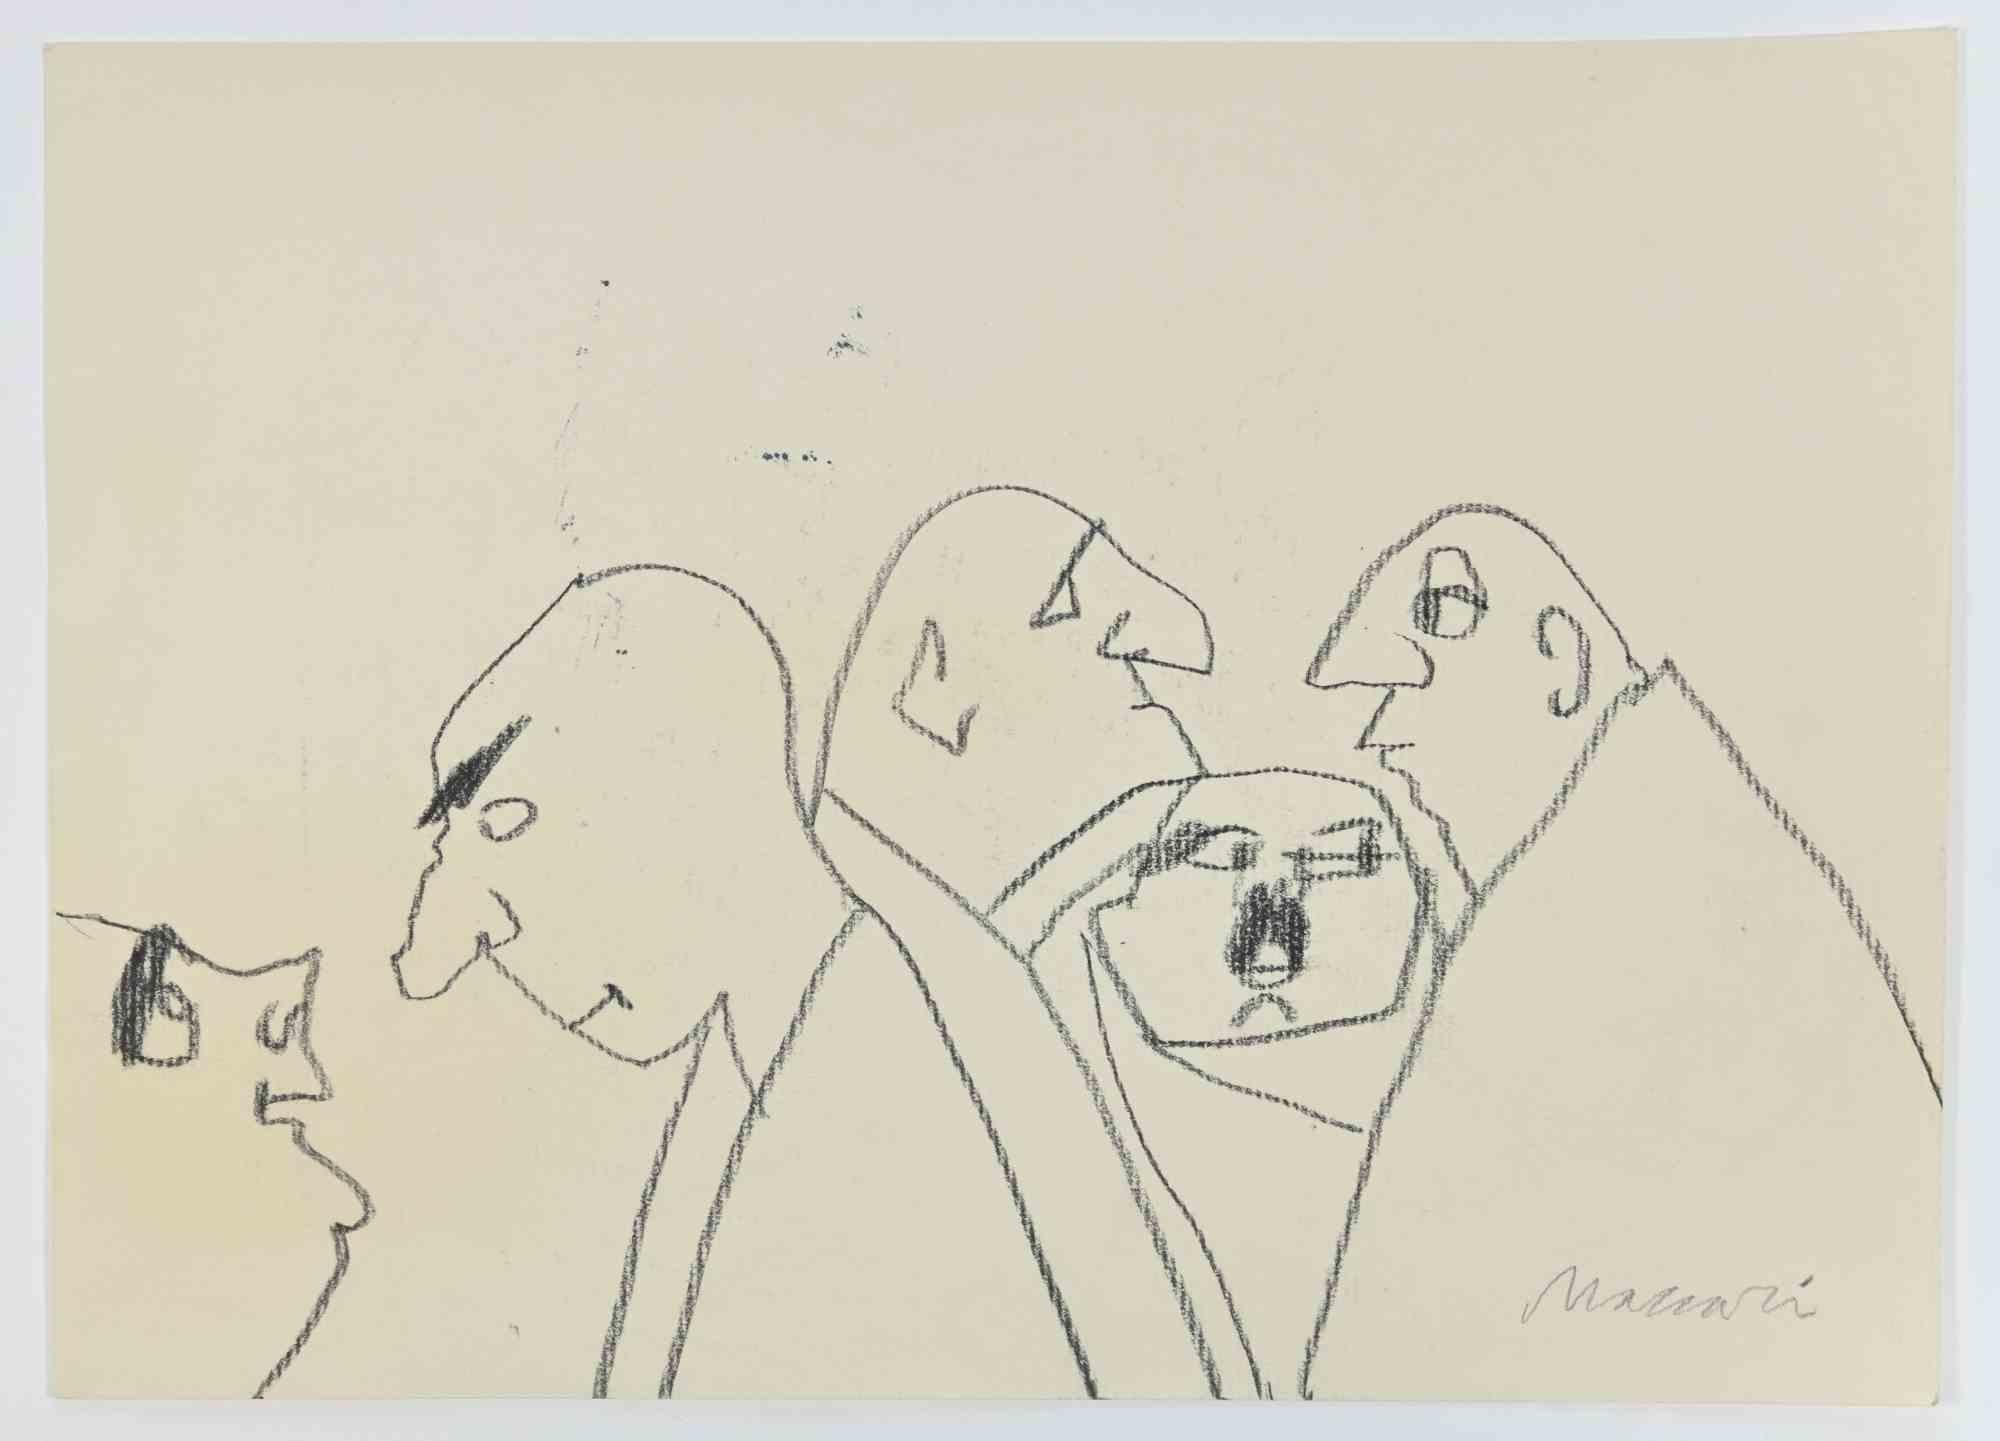 Bald Men is a Pencil Drawing realized by Mino Maccari  (1924-1989) in the 1960s.

Hand-signed on the lower margin.

Good condition.

Mino Maccari (Siena, 1924-Rome, June 16, 1989) was an Italian writer, painter, engraver and journalist, winner of